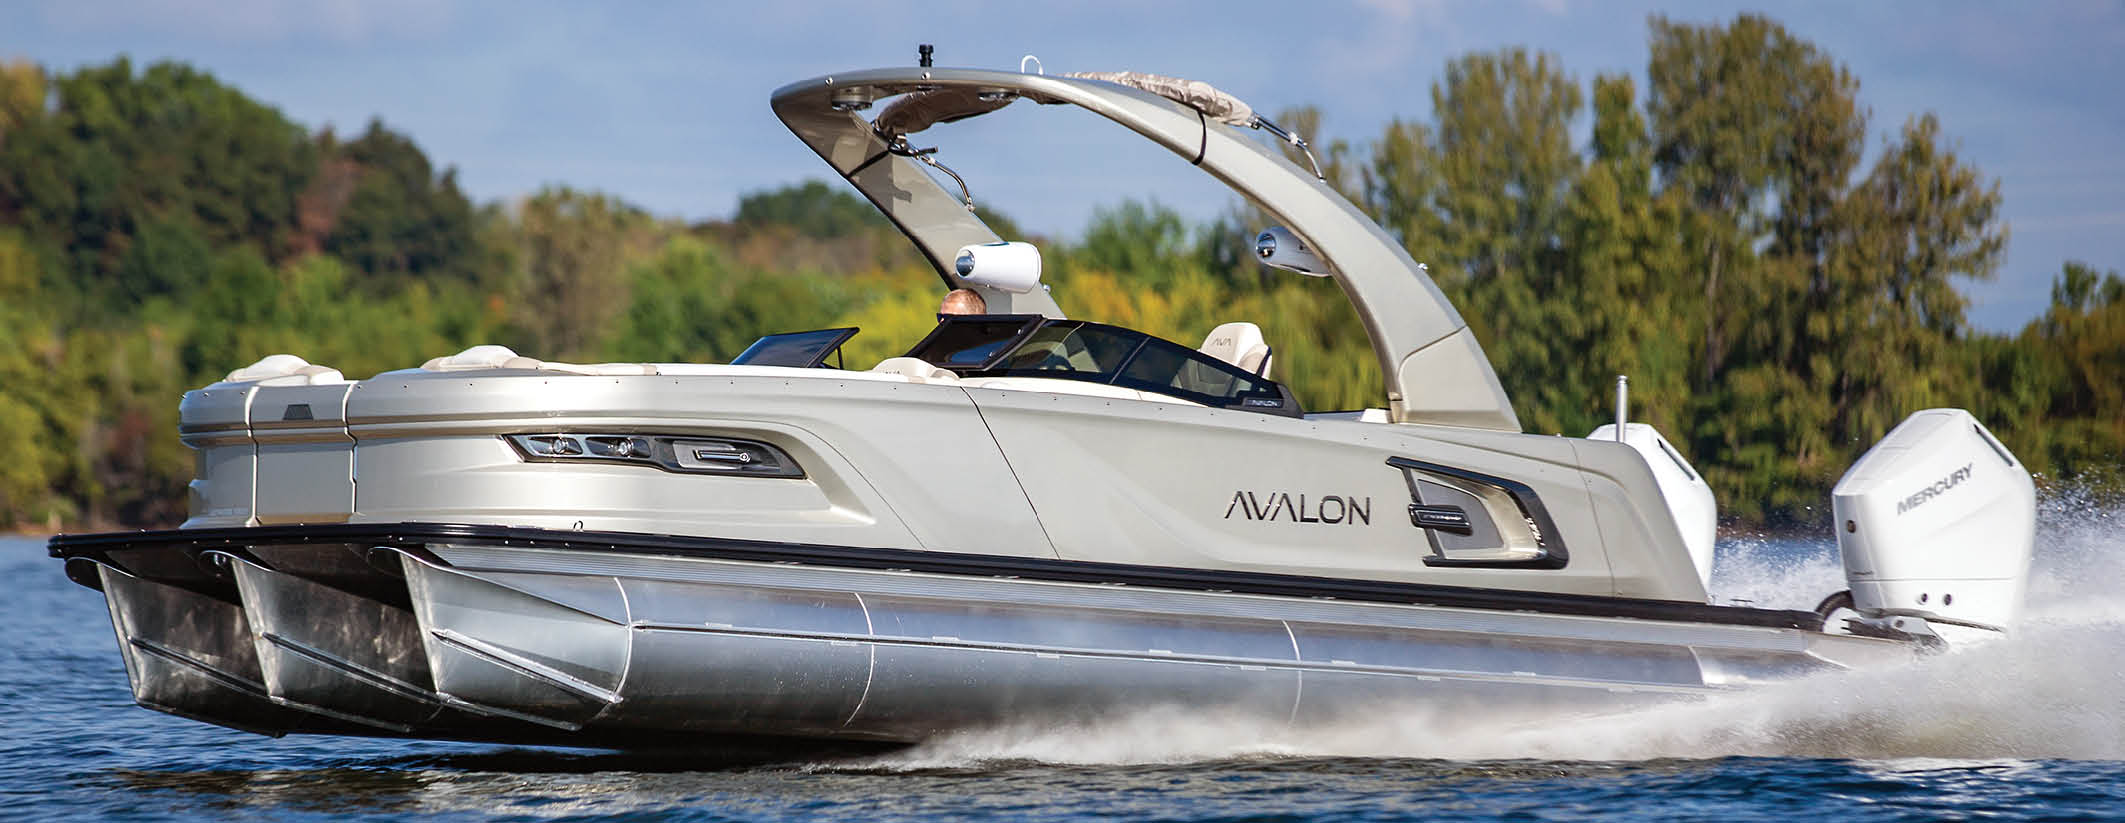 side view of Avalon Pontoon on the water